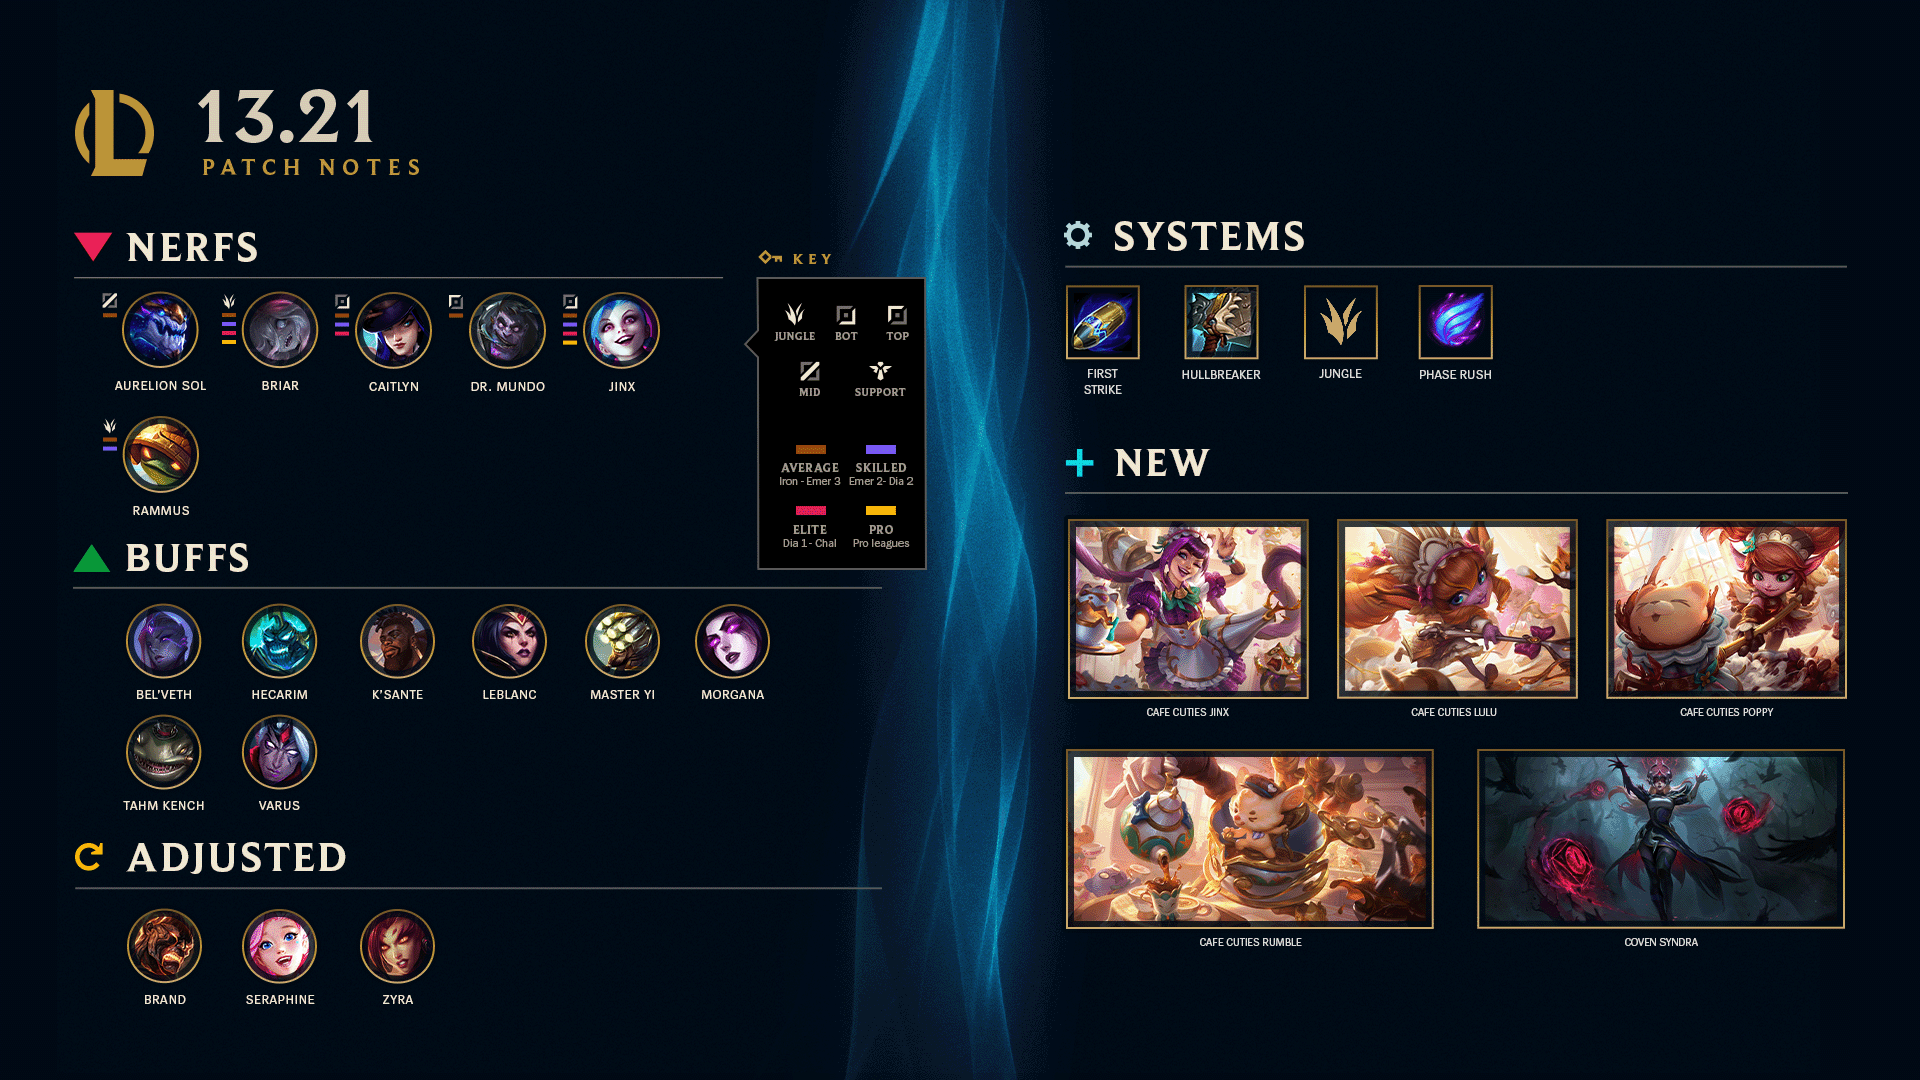 Summary Infographic created by Riot